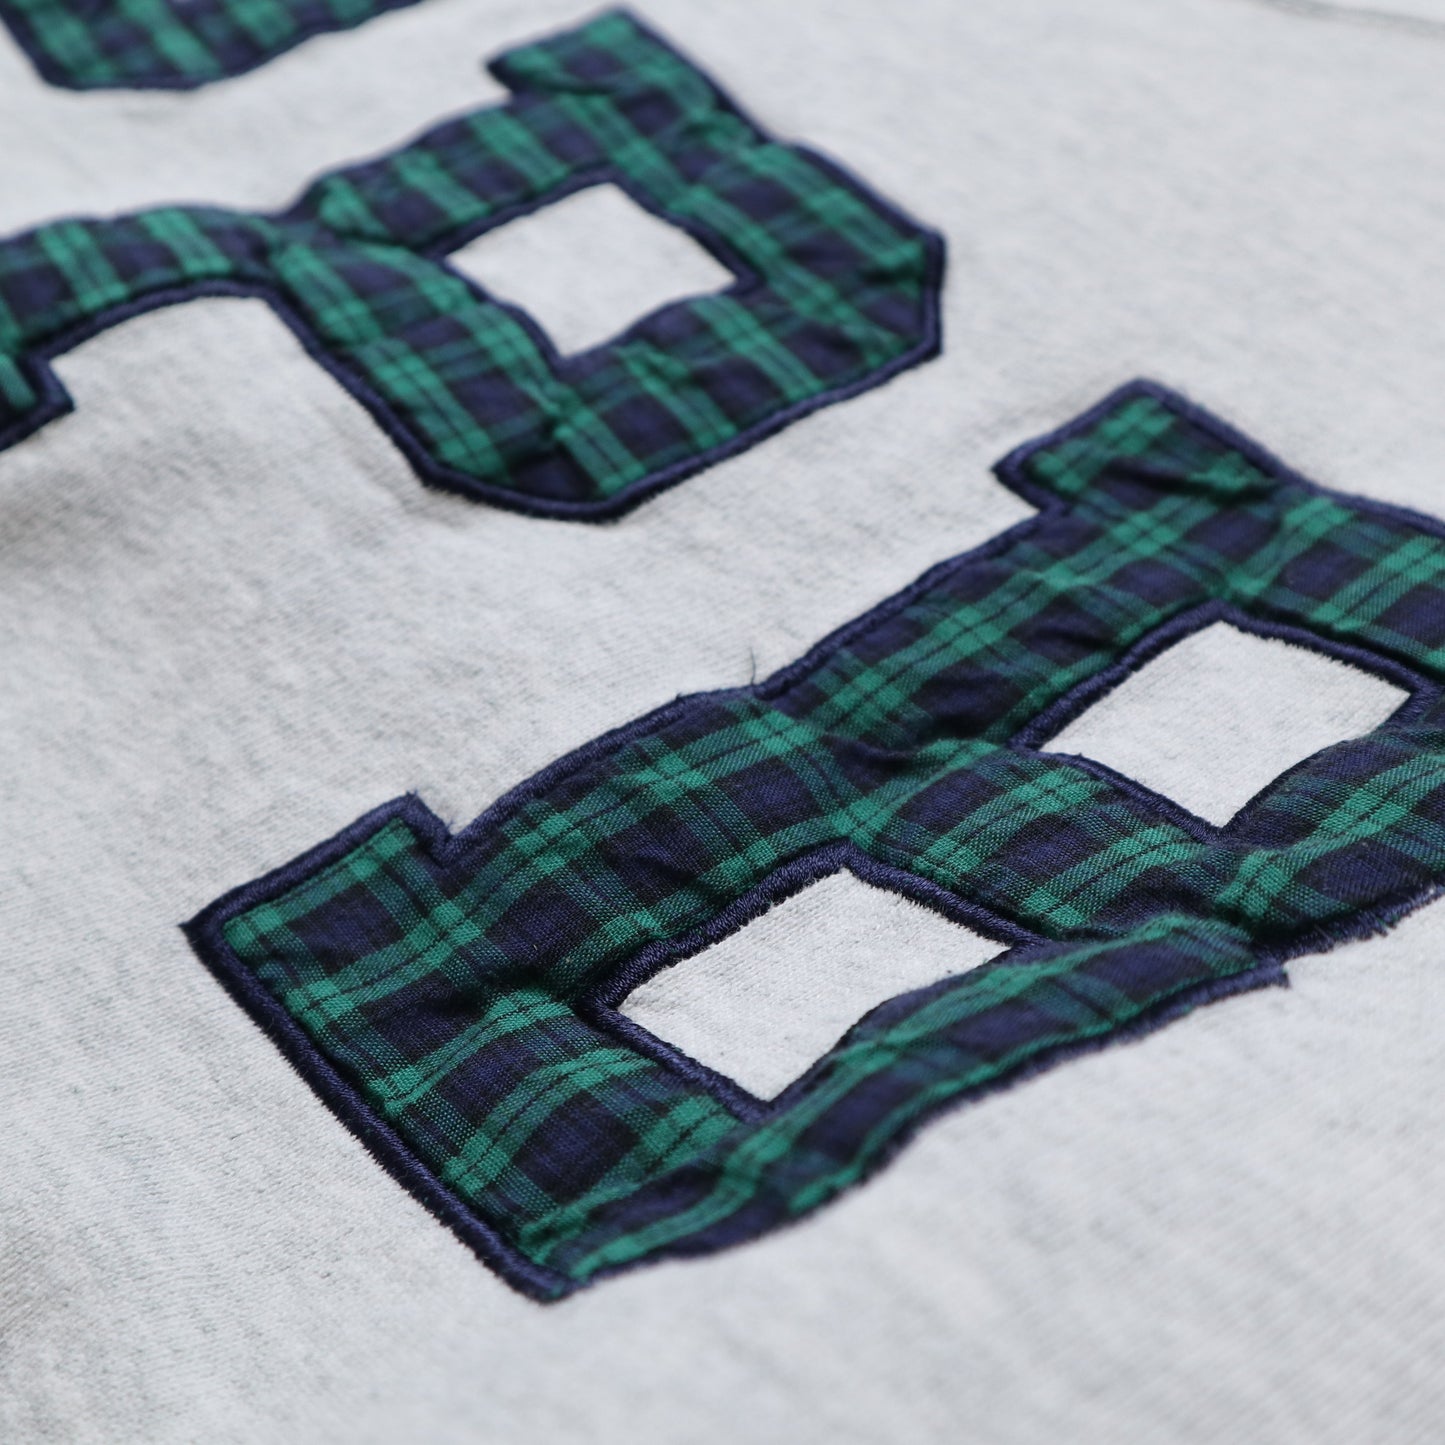 90s American made PPB blue and green plaid patchwork college T vintage sweatshirt